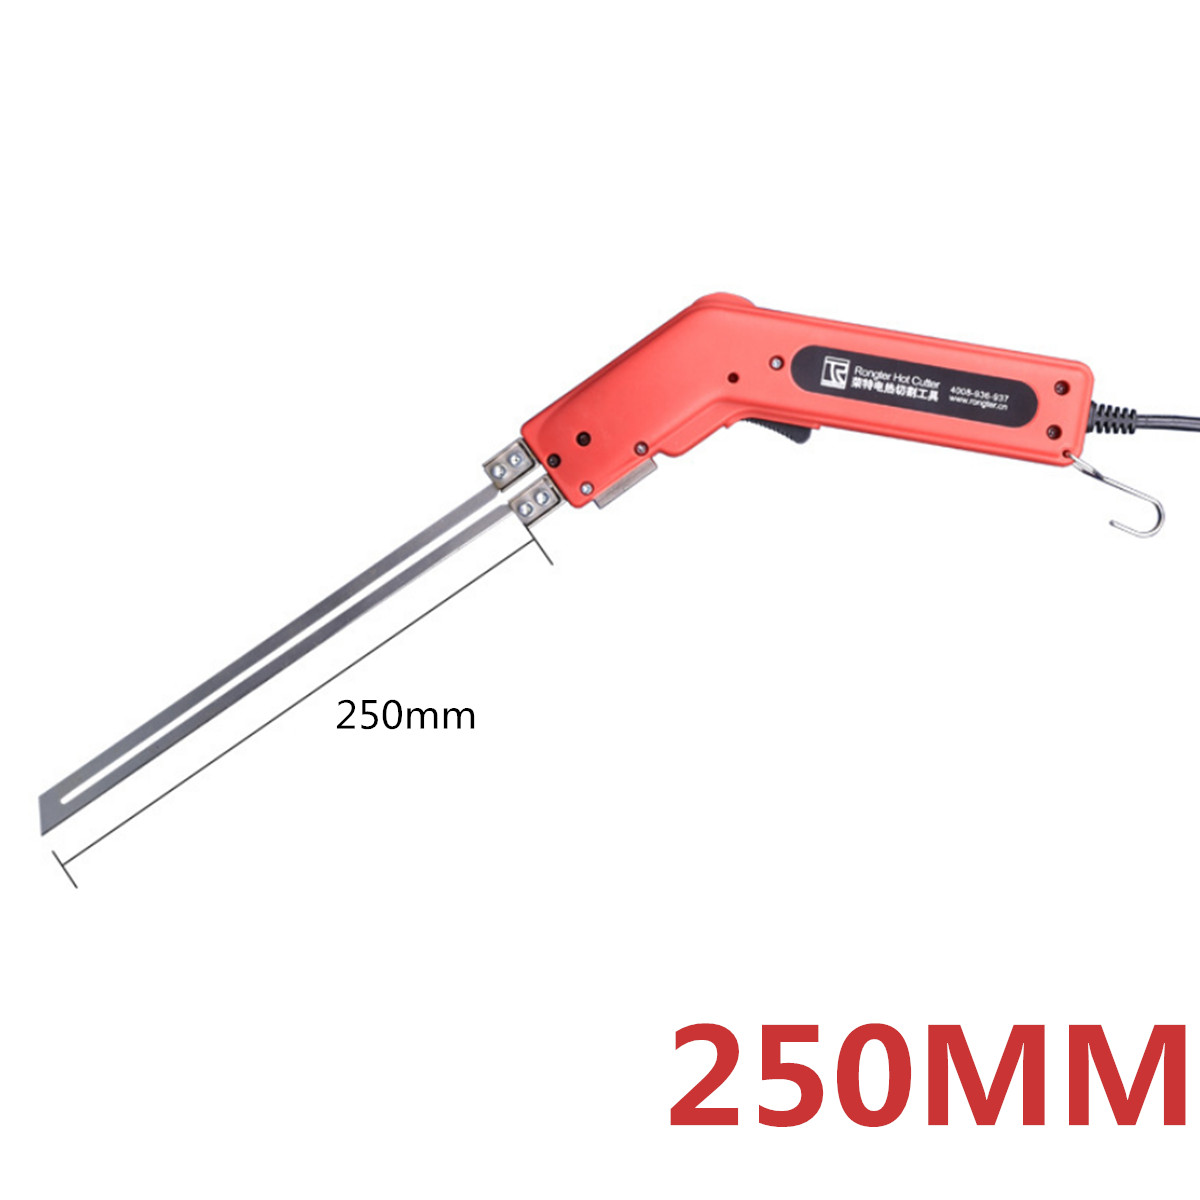 250W-220V-Nordstrand-Pro-Electric-Hot-Knife-Styrofoam-Foam-Cutter-Tool-with-Blades-Accessories-1297210-7